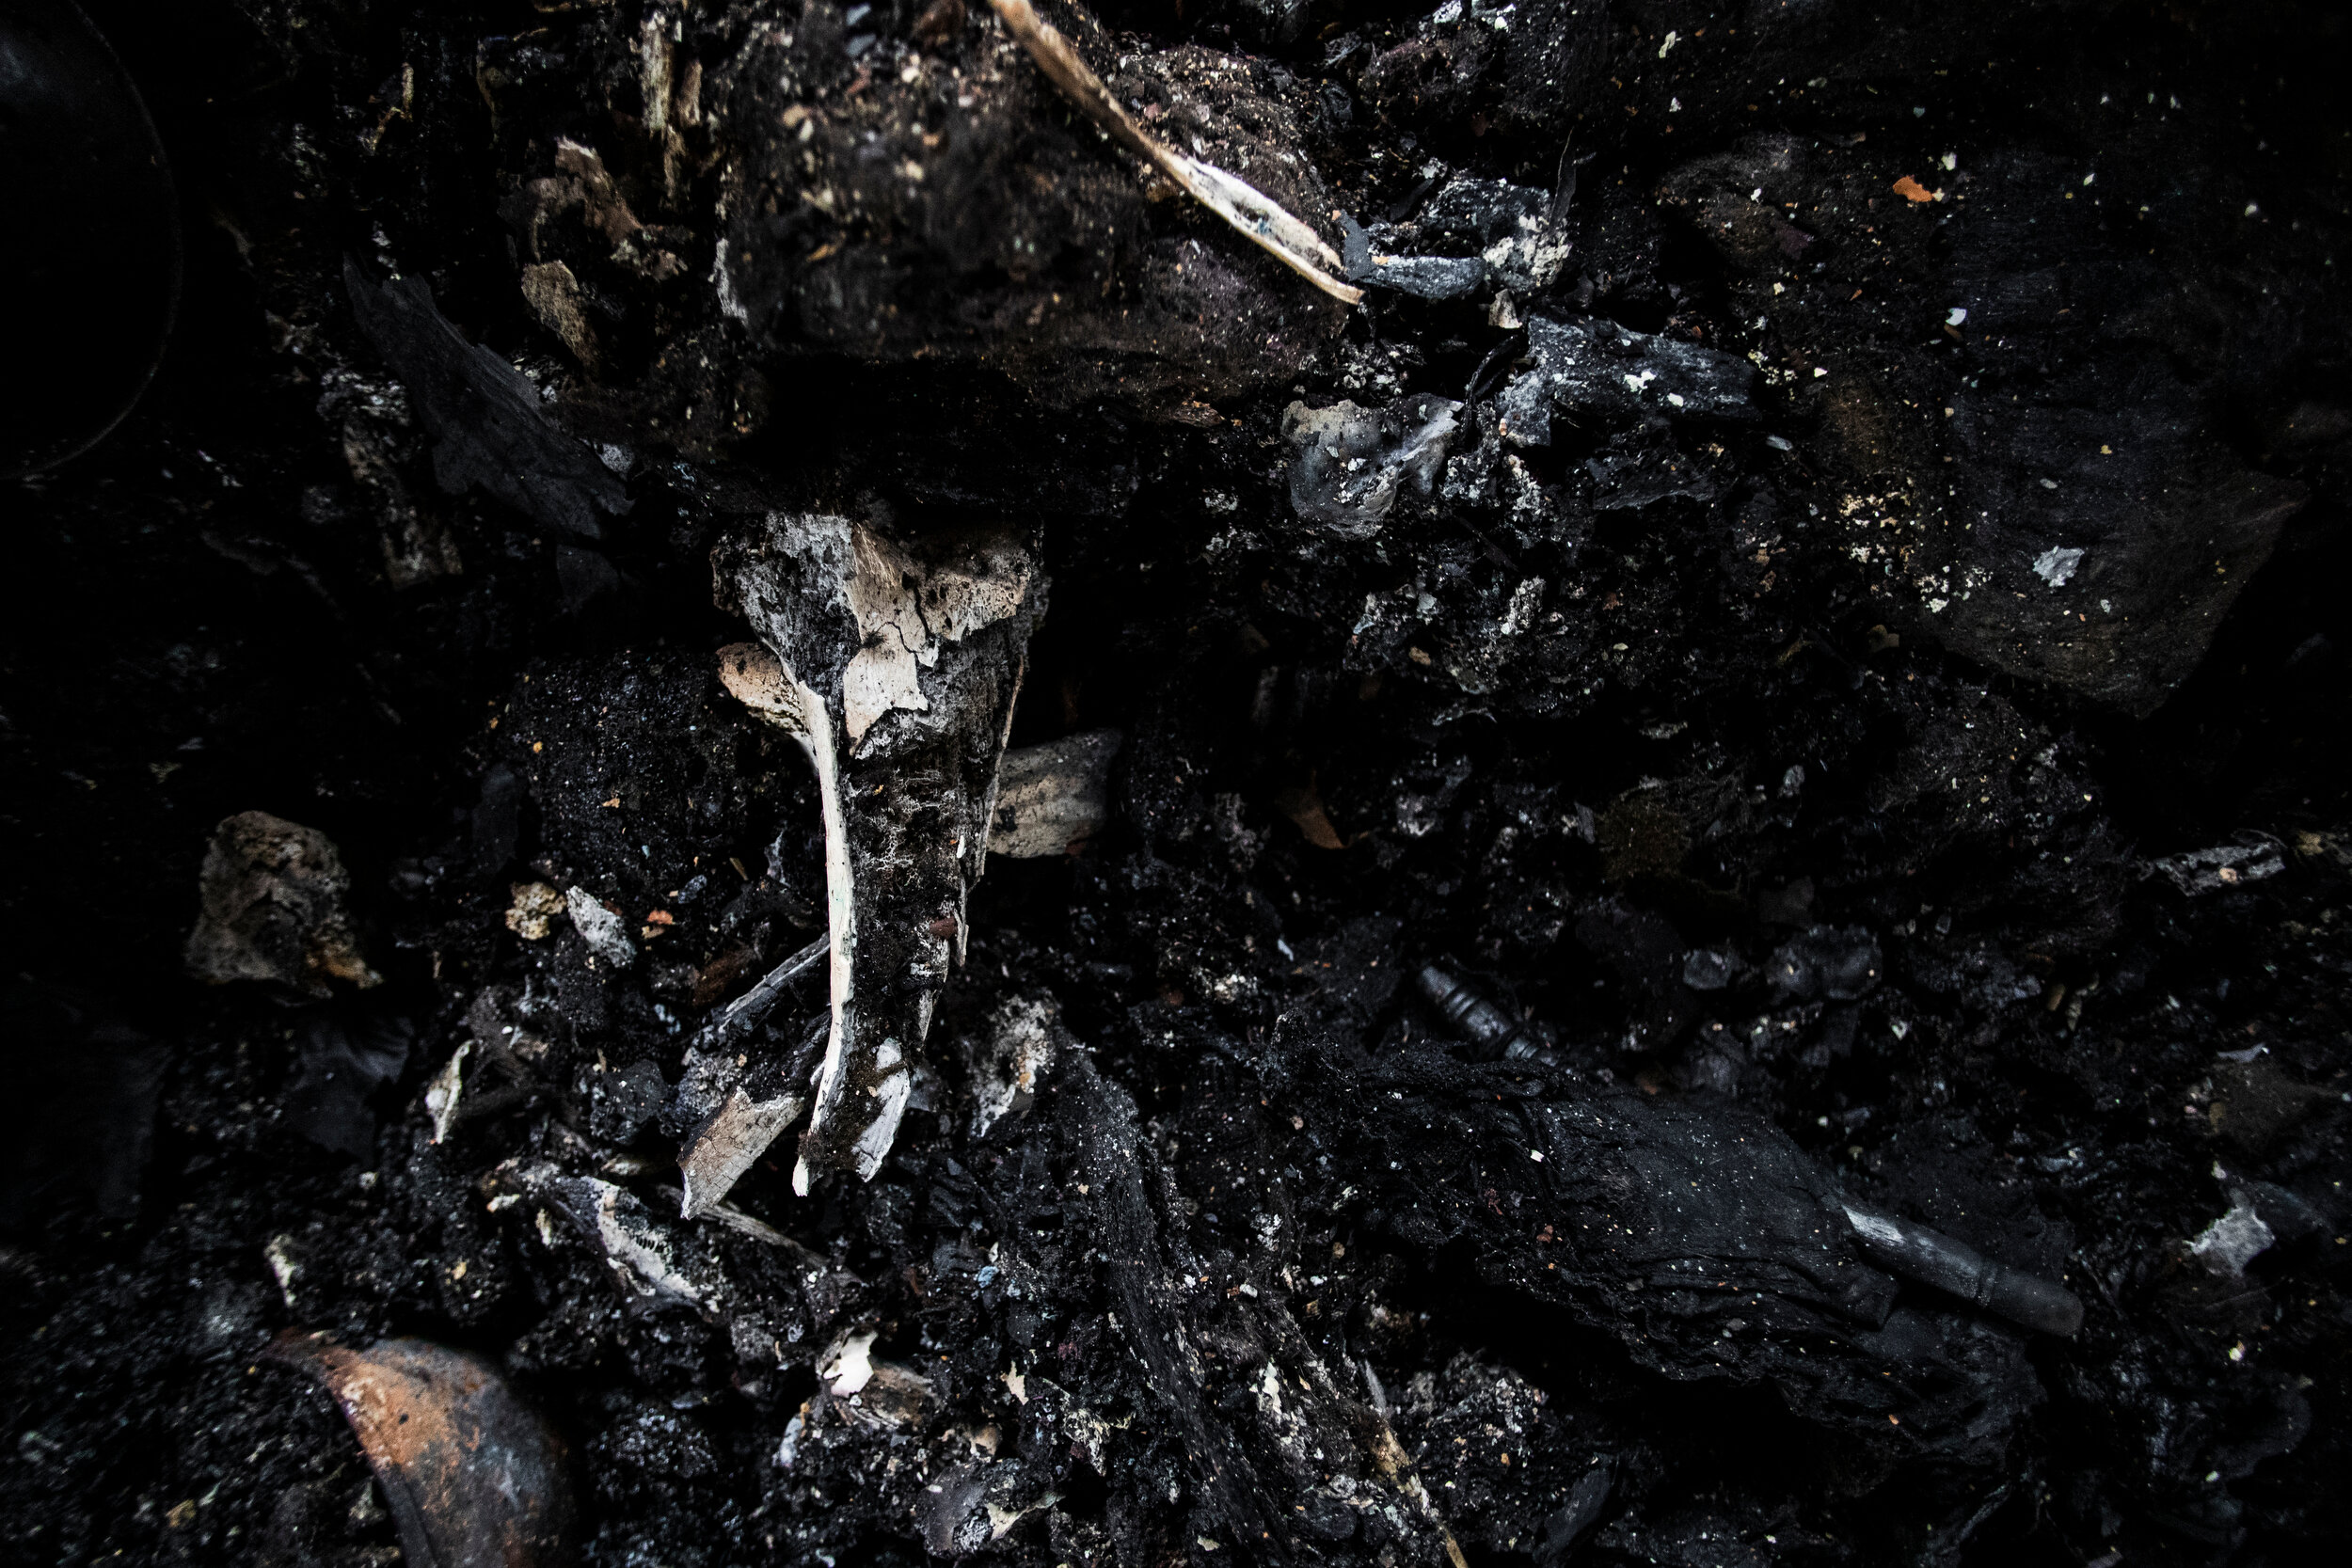  Charred bones of people that succumbed to the fire on the train a day after one of the deadliest train accidents in Pakistan’s history at a railway station in Channi Gote, Pakistan where the train finally stopped. Nov 1, 2019 